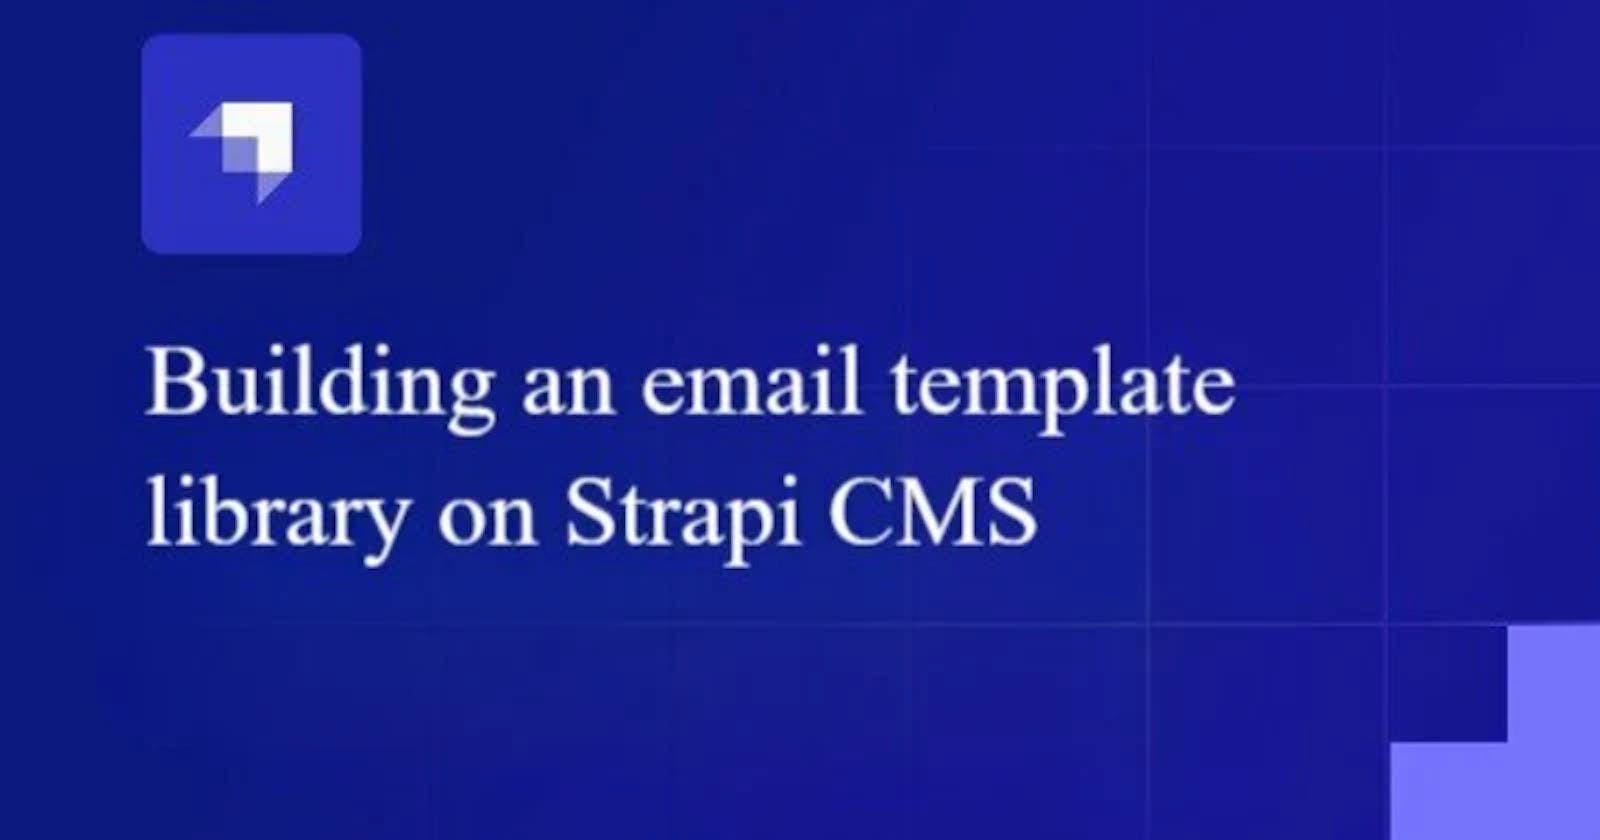 Building an email template library on Strapi CMS